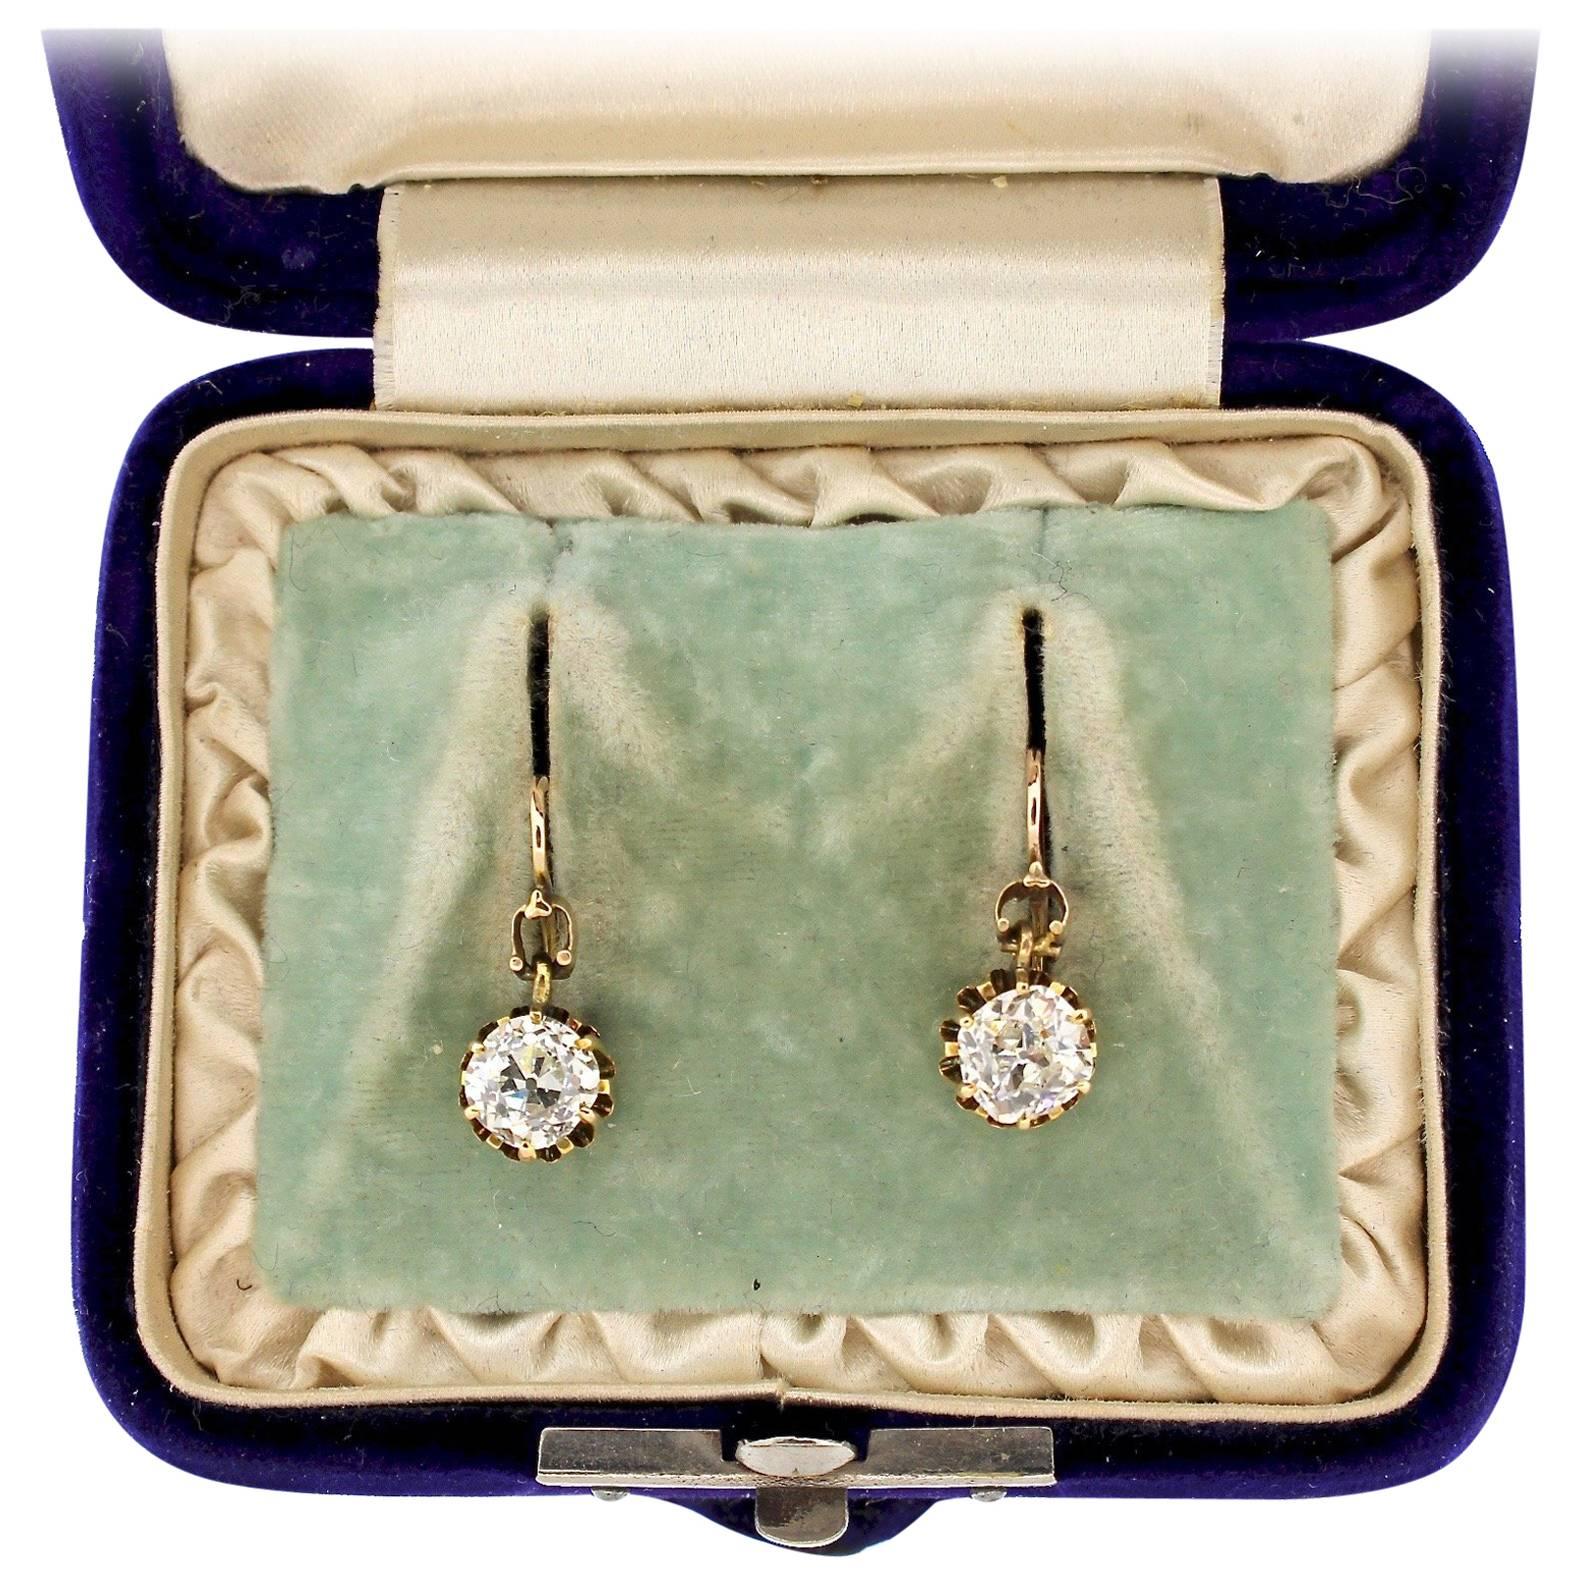 Victorian Diamond Drop Earrings with Original Antique Coach Covers